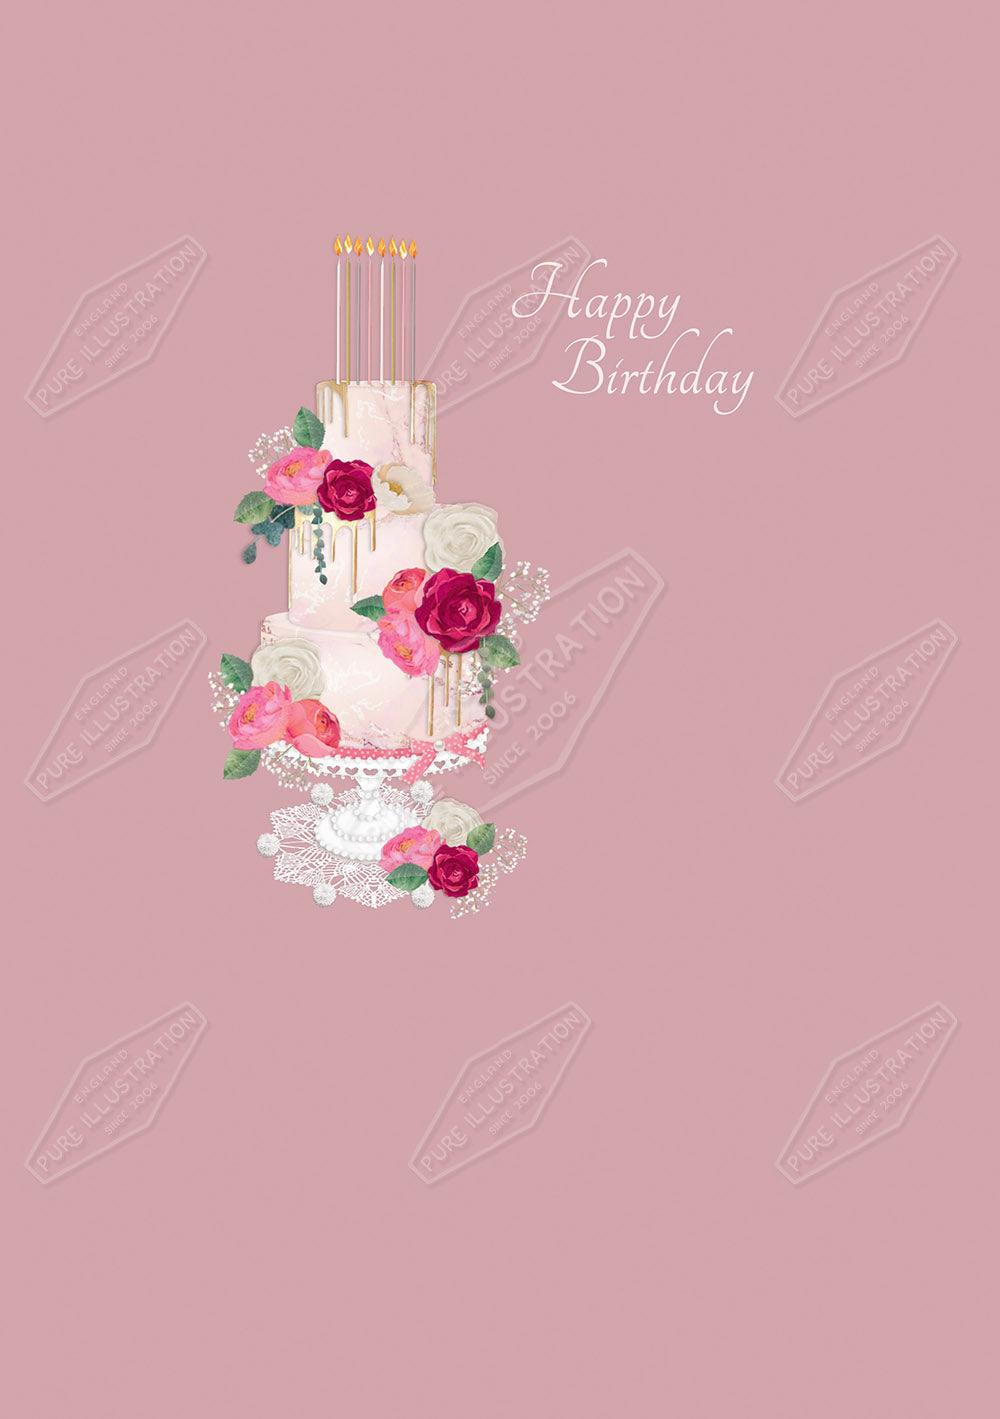 00033195KSP- Kerry Spurling is represented by Pure Art Licensing Agency - Birthday Greeting Card Design